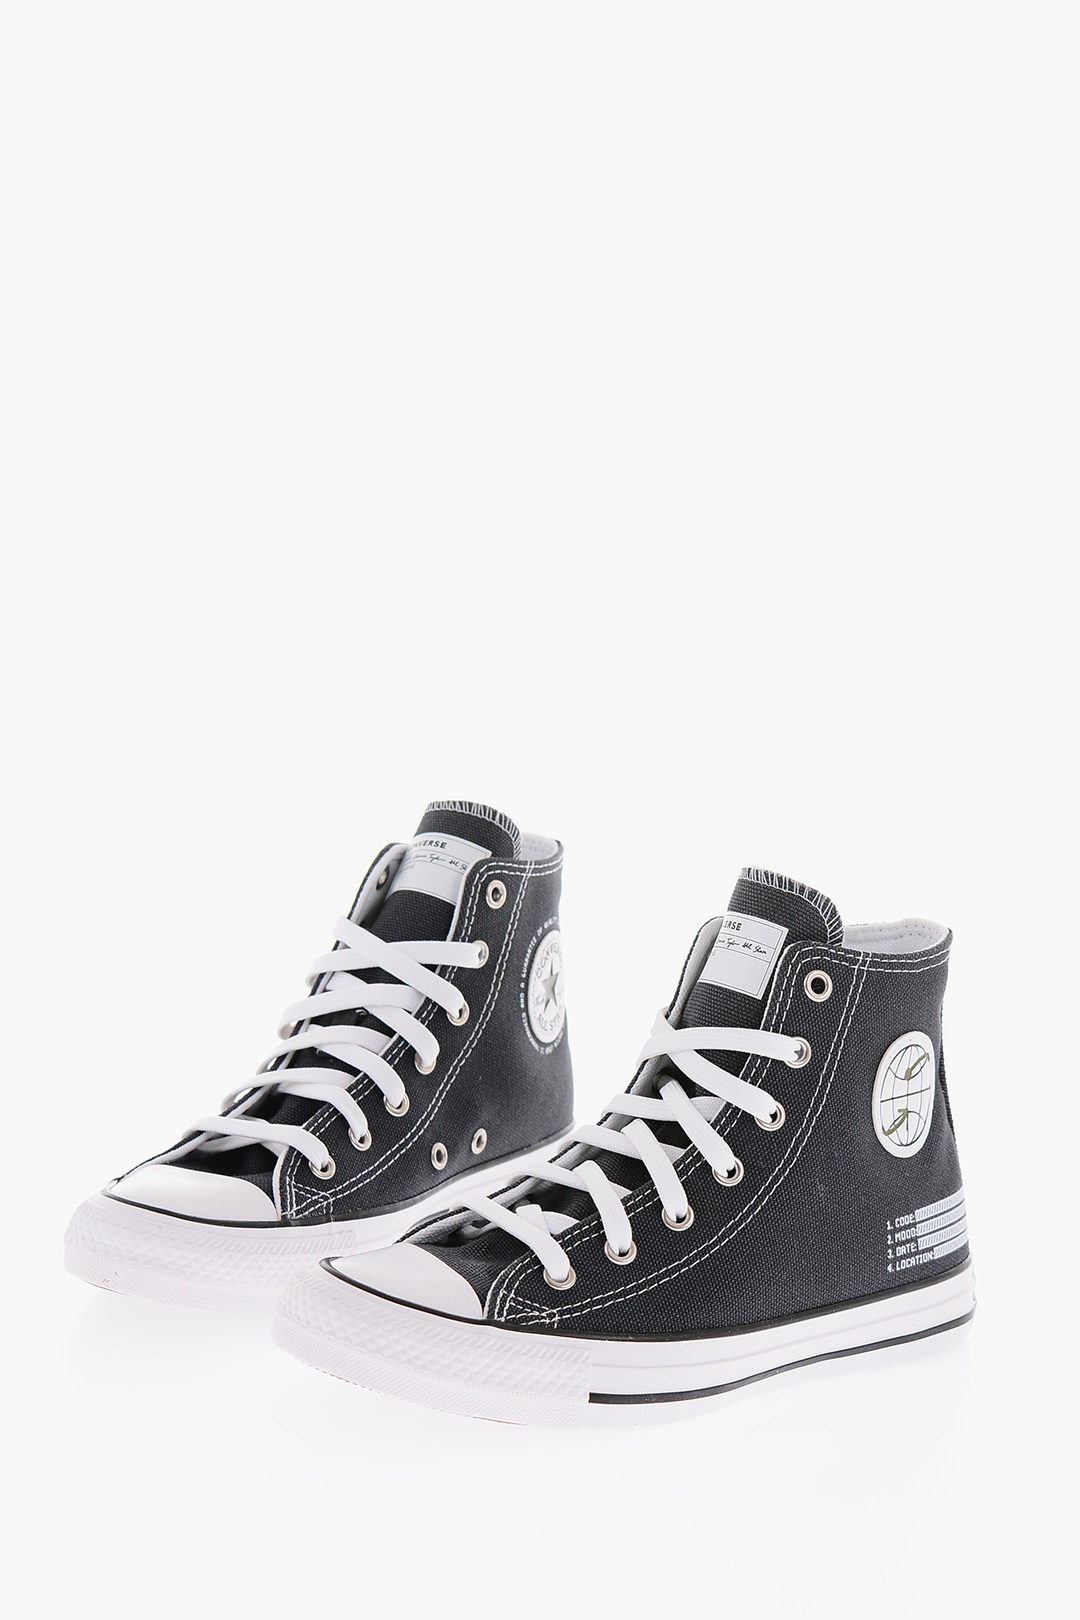 Shuraba Seminary over there Converse ALL STAR CHUCK TAYLOR denim high top sneakers women - Glamood  Outlet